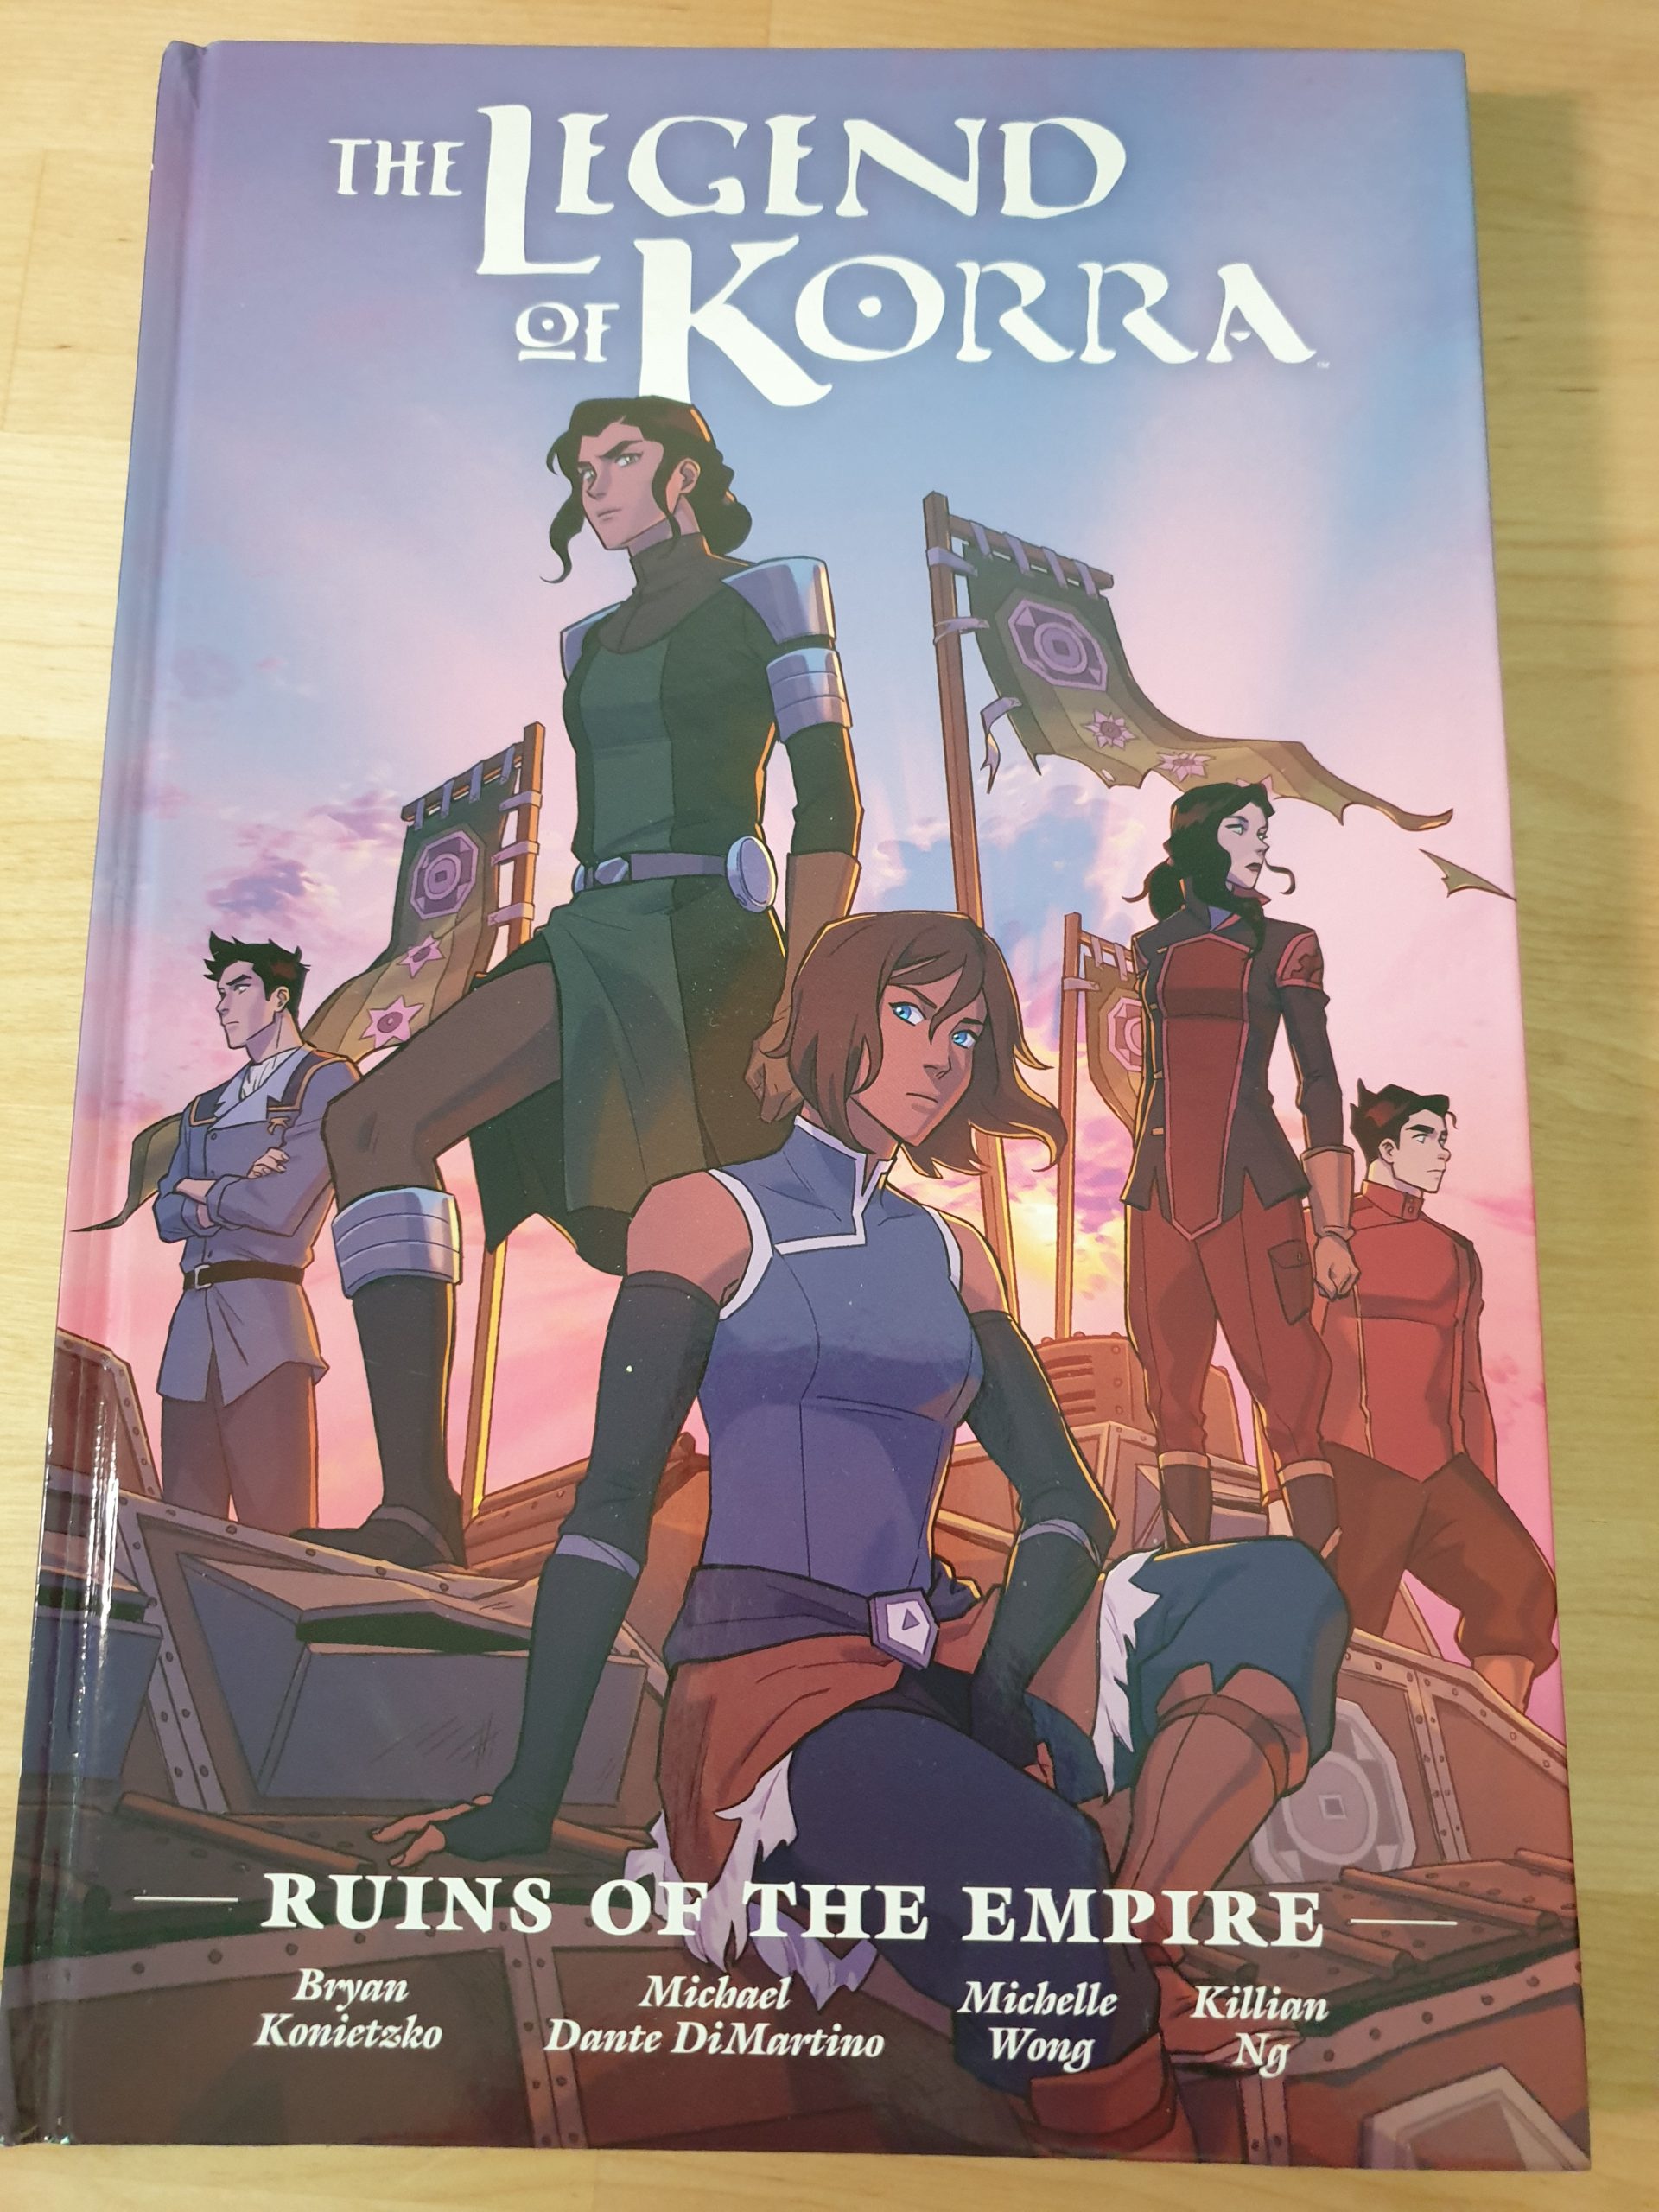 Ruins of The Empire (Legend of Korra) Collector's Edition (Hardcover)